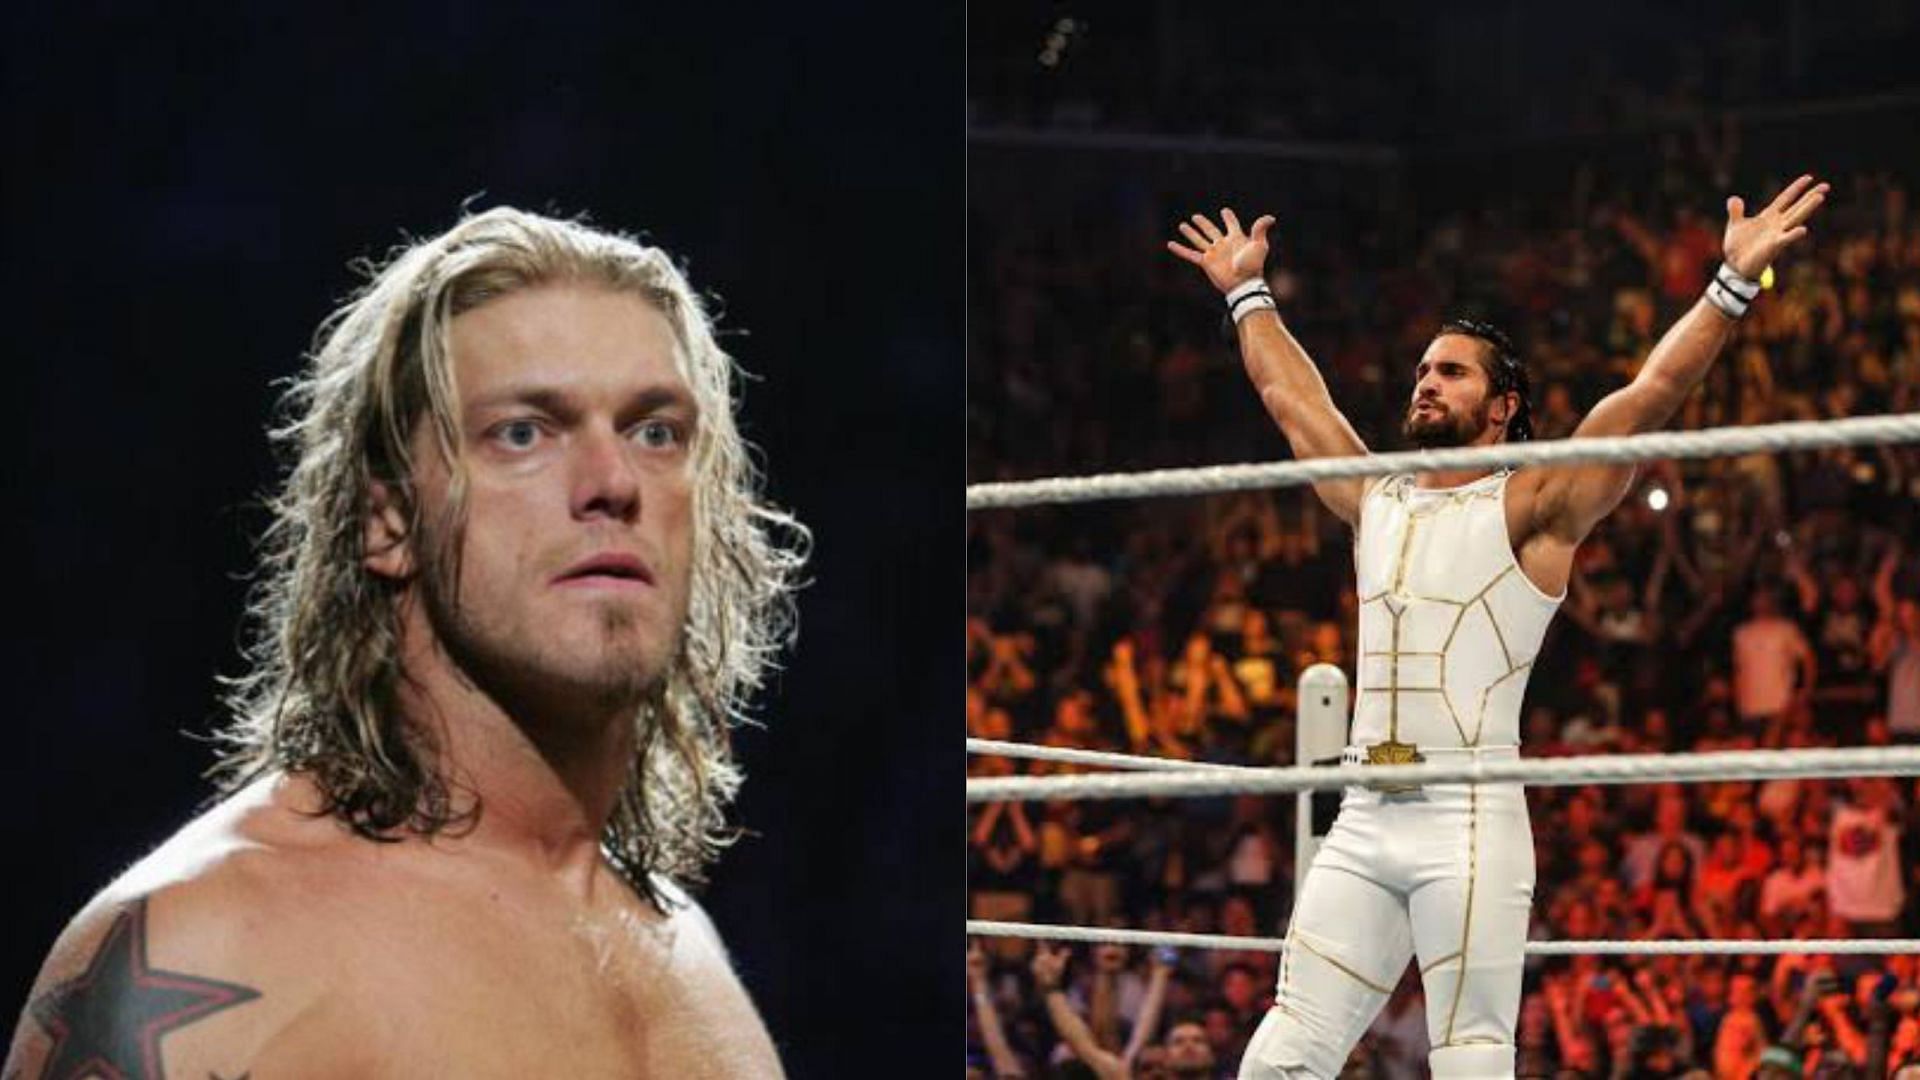 Edge in 2004 (L); Seth Rollins in 2015 (R).